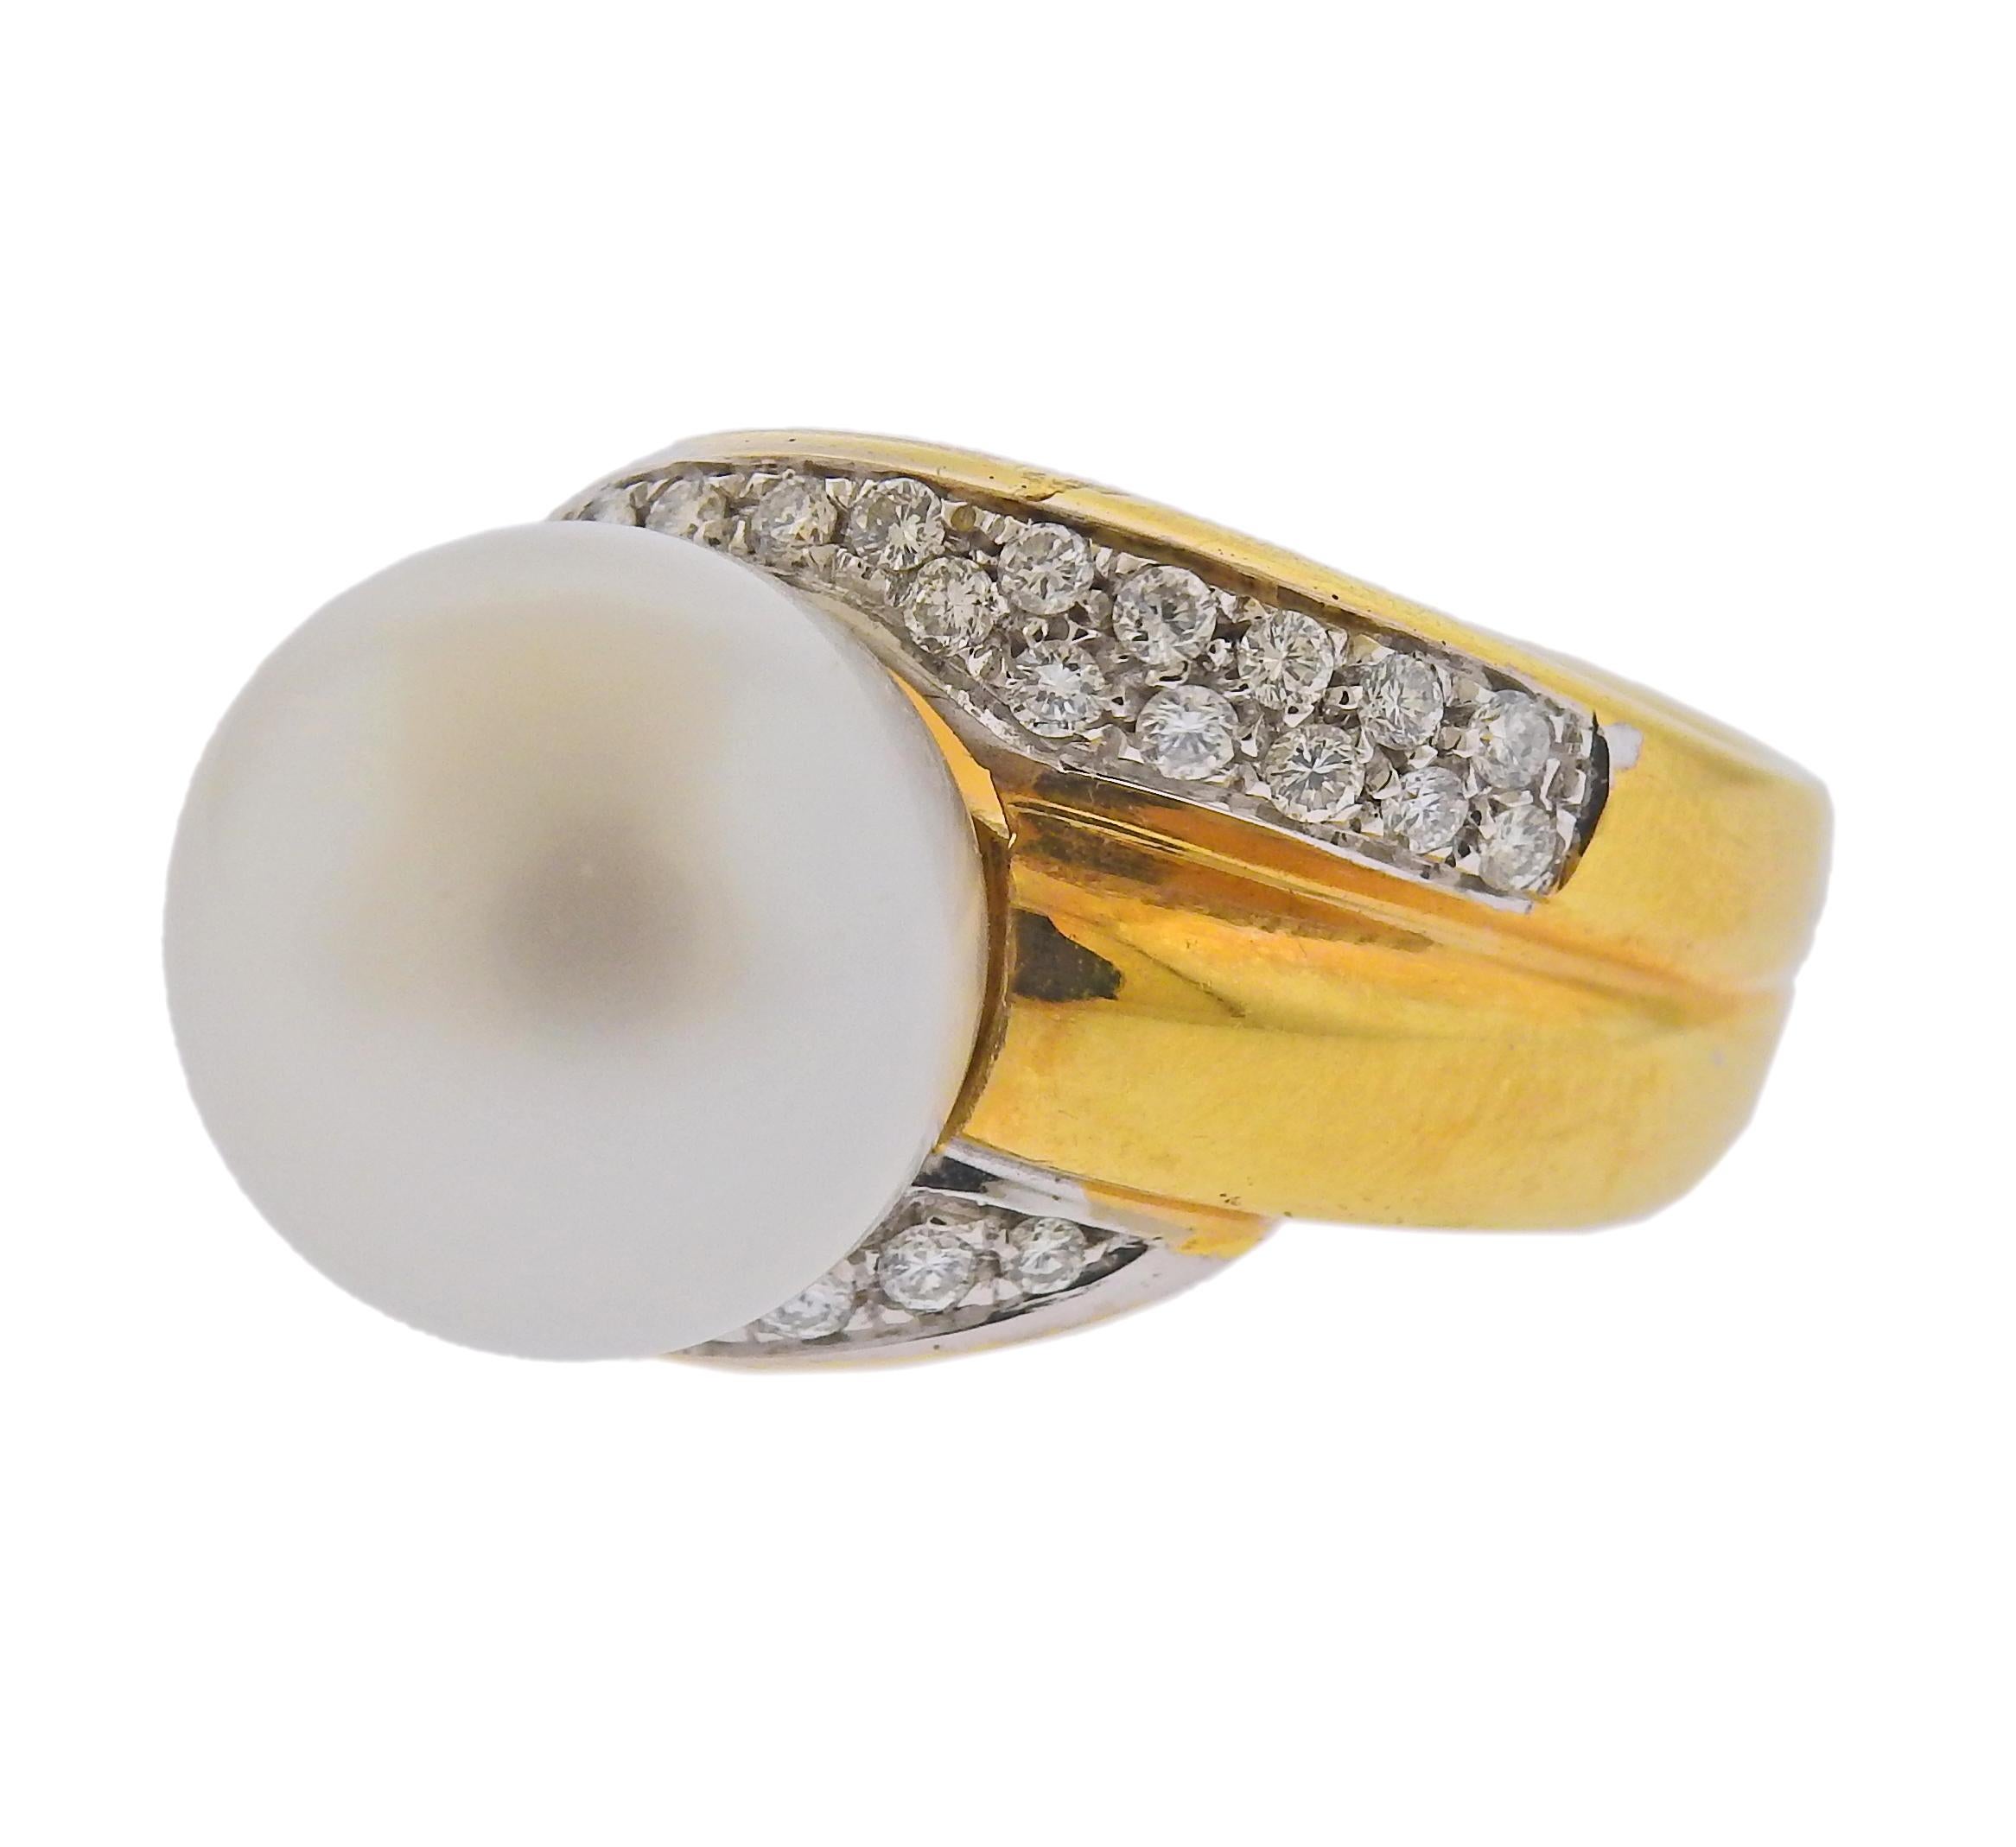 18k gold ring by Leo Pizzo, with 13mm South Sea pearl, and approx. 0.72ctw in diamonds. Ring size - 7.5, ring top - 15mm wide. Marked: Leo Pizzo, 750, Italian mark. Weight - 14.2 grams.